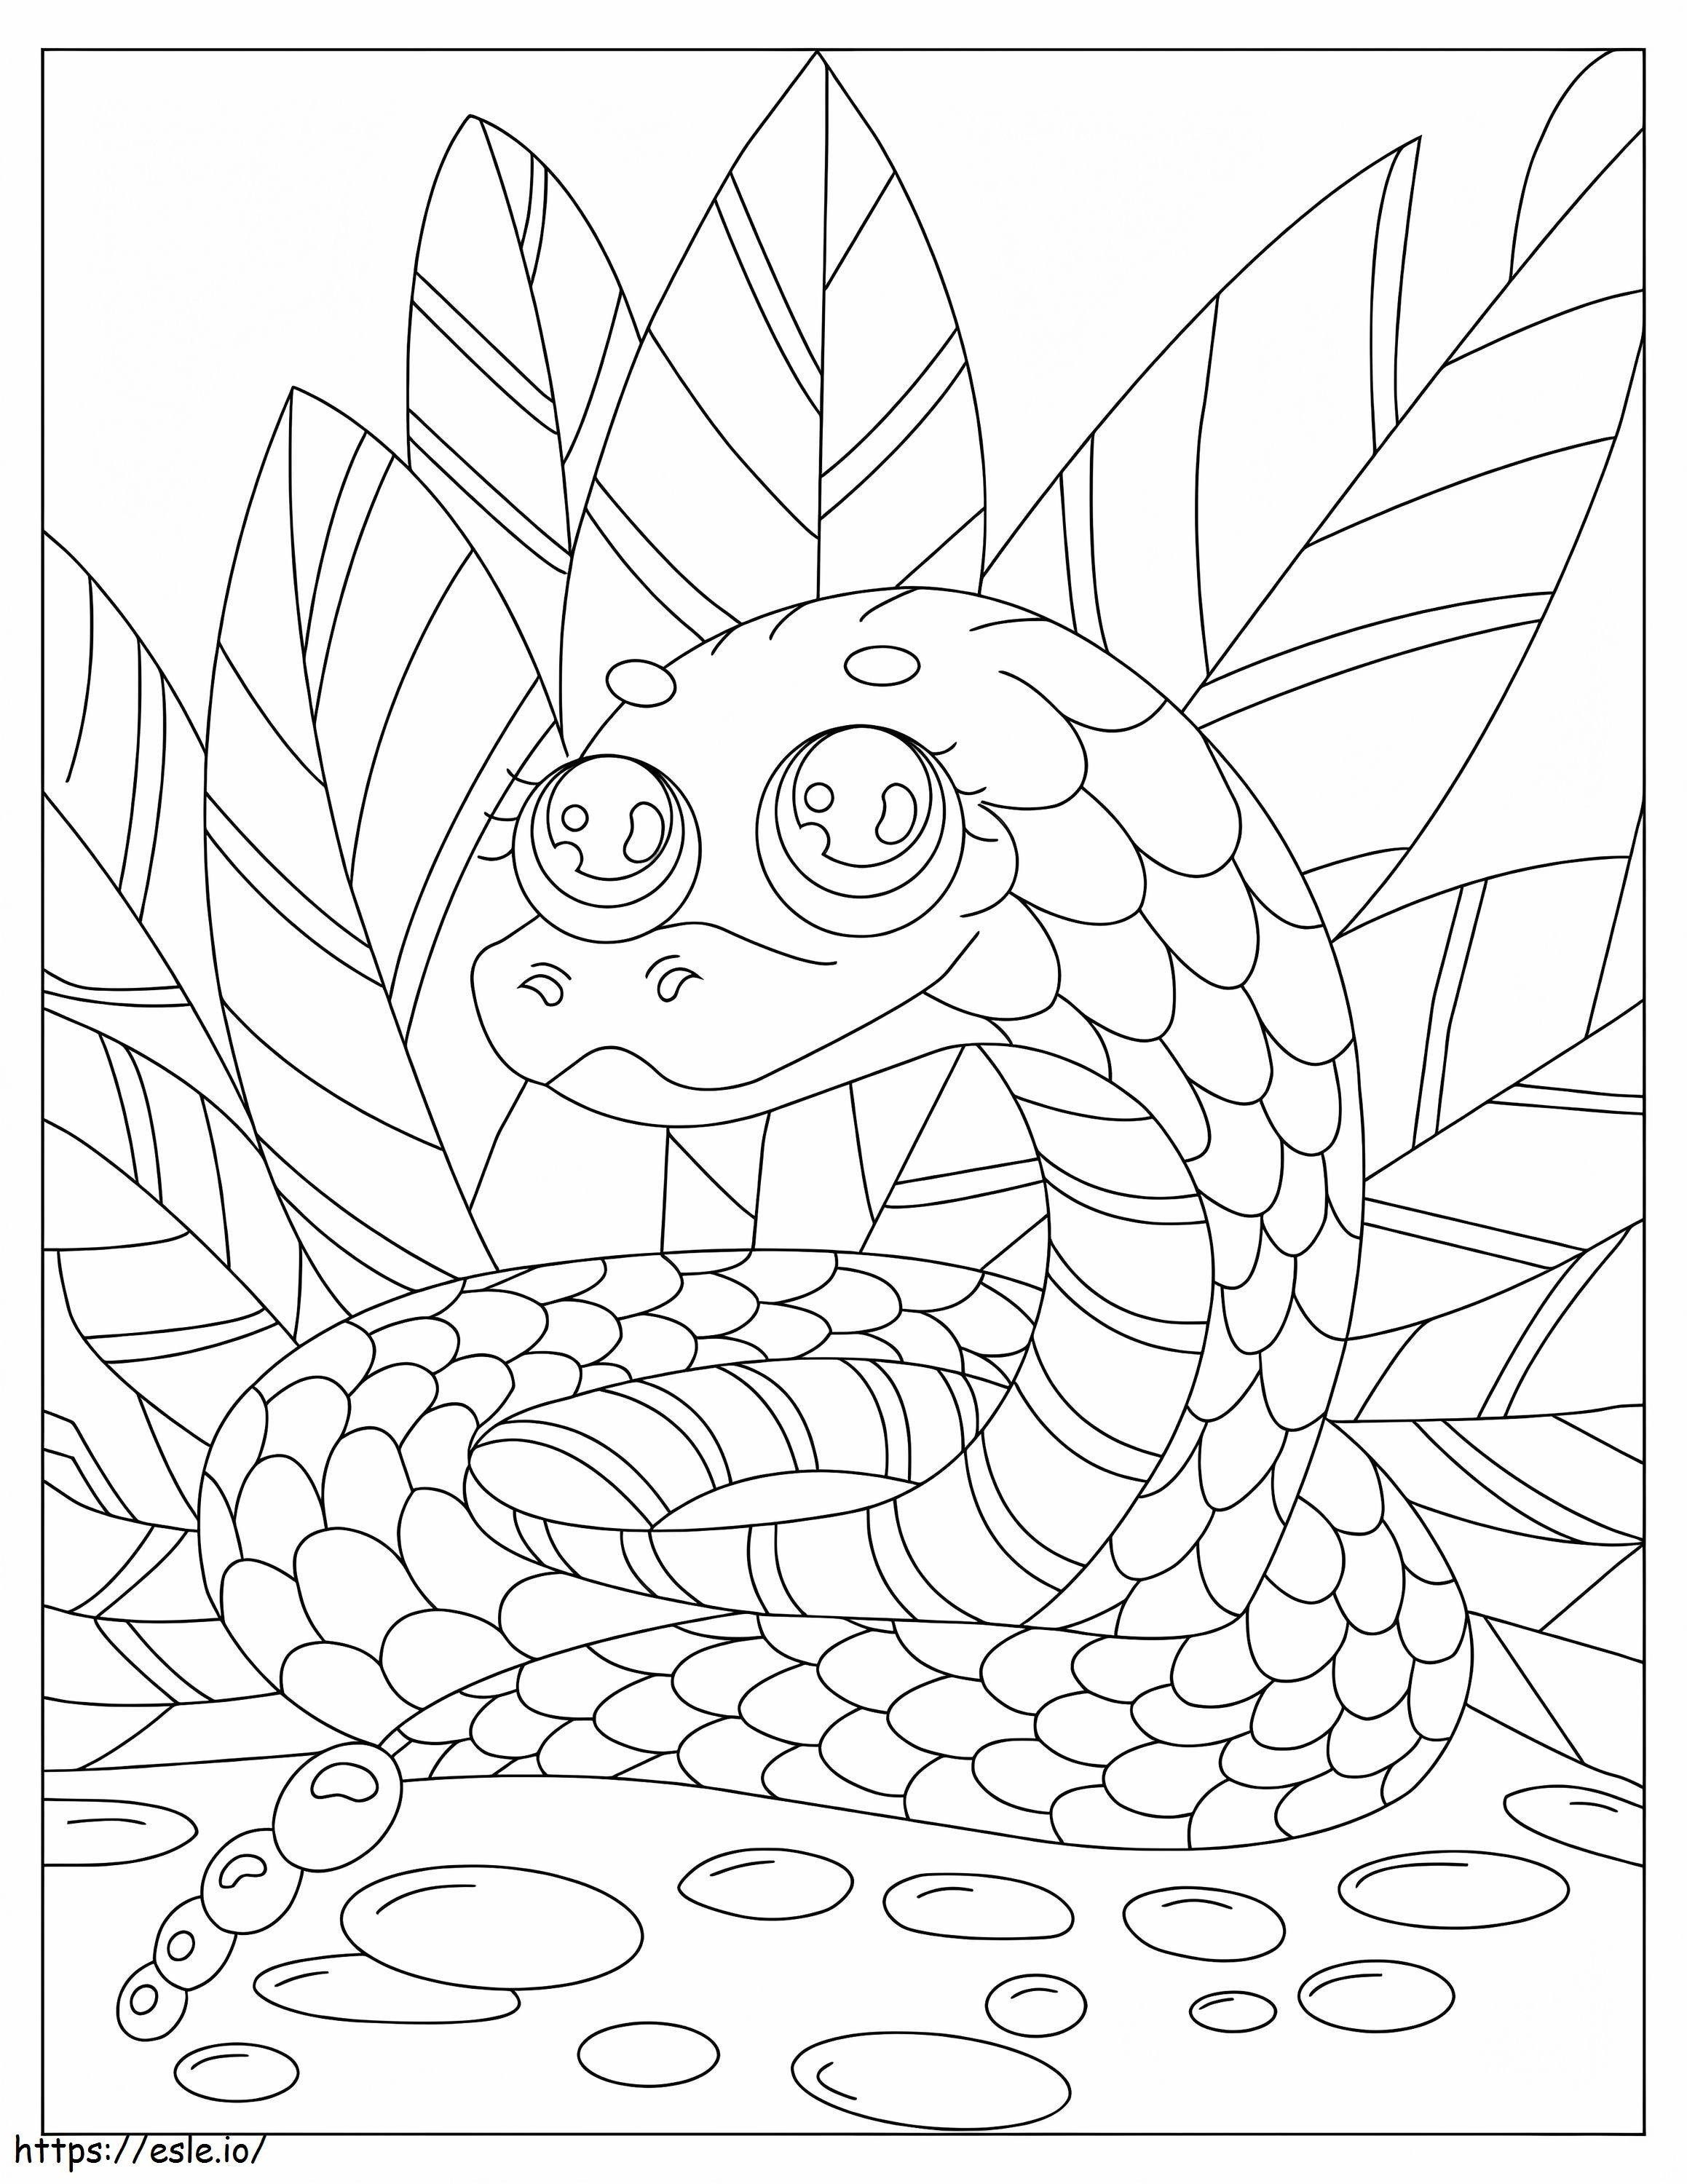 Snake With Leaves coloring page